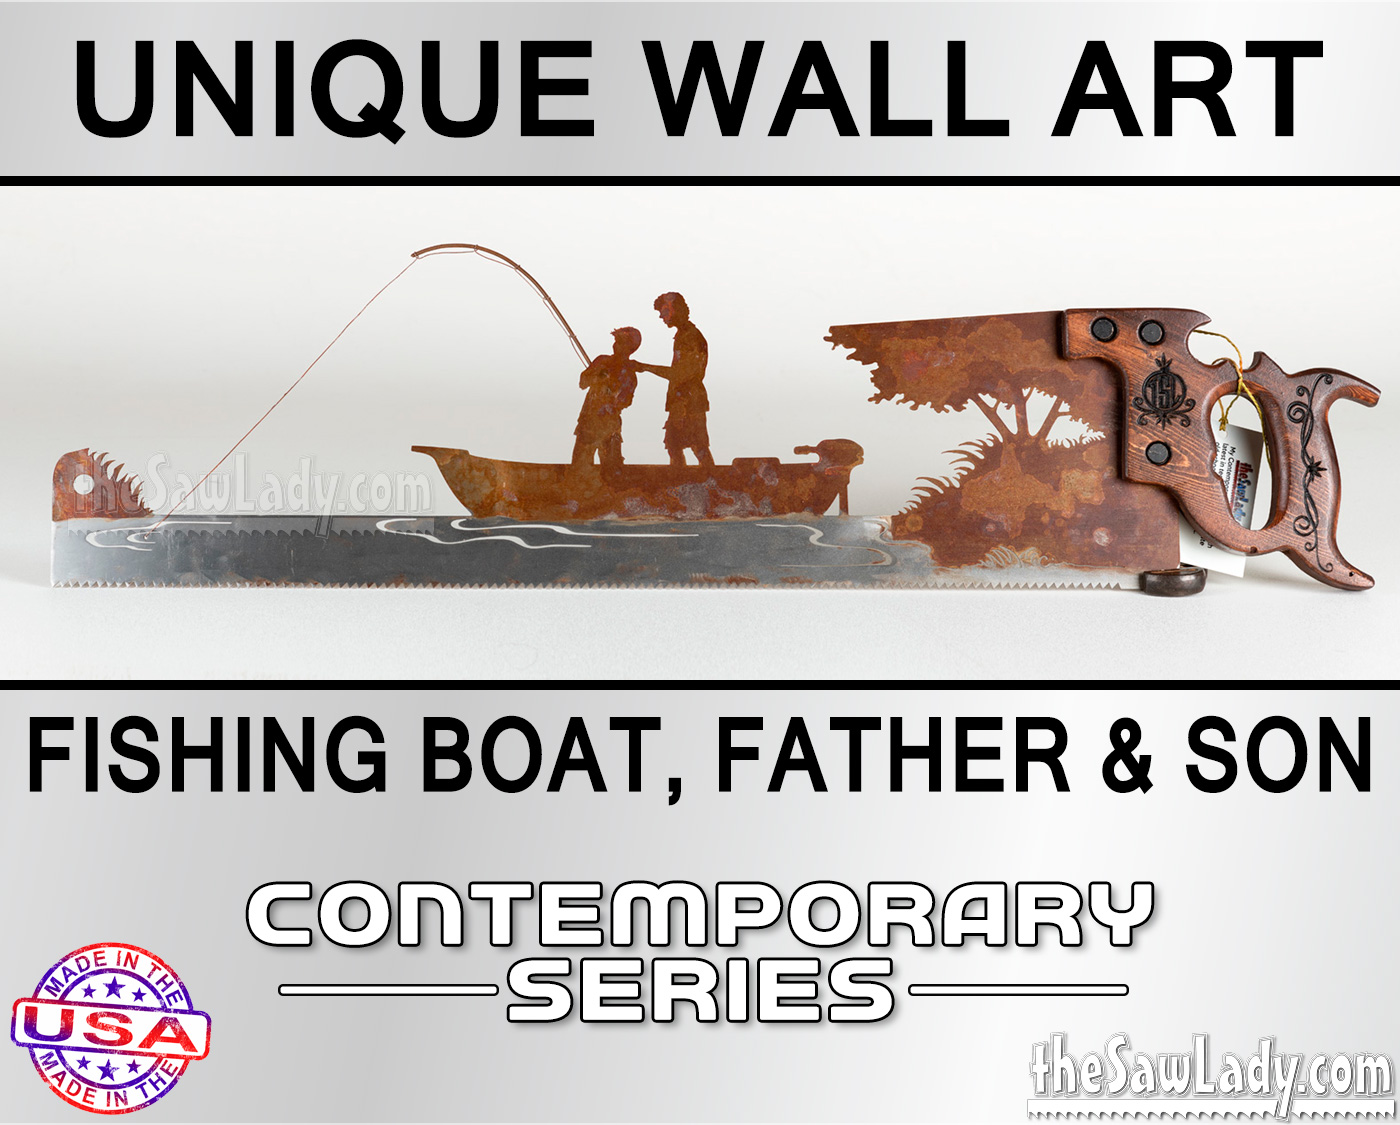 Father and Son in Fishing Boat - Metal Saw Wall Art Gift for